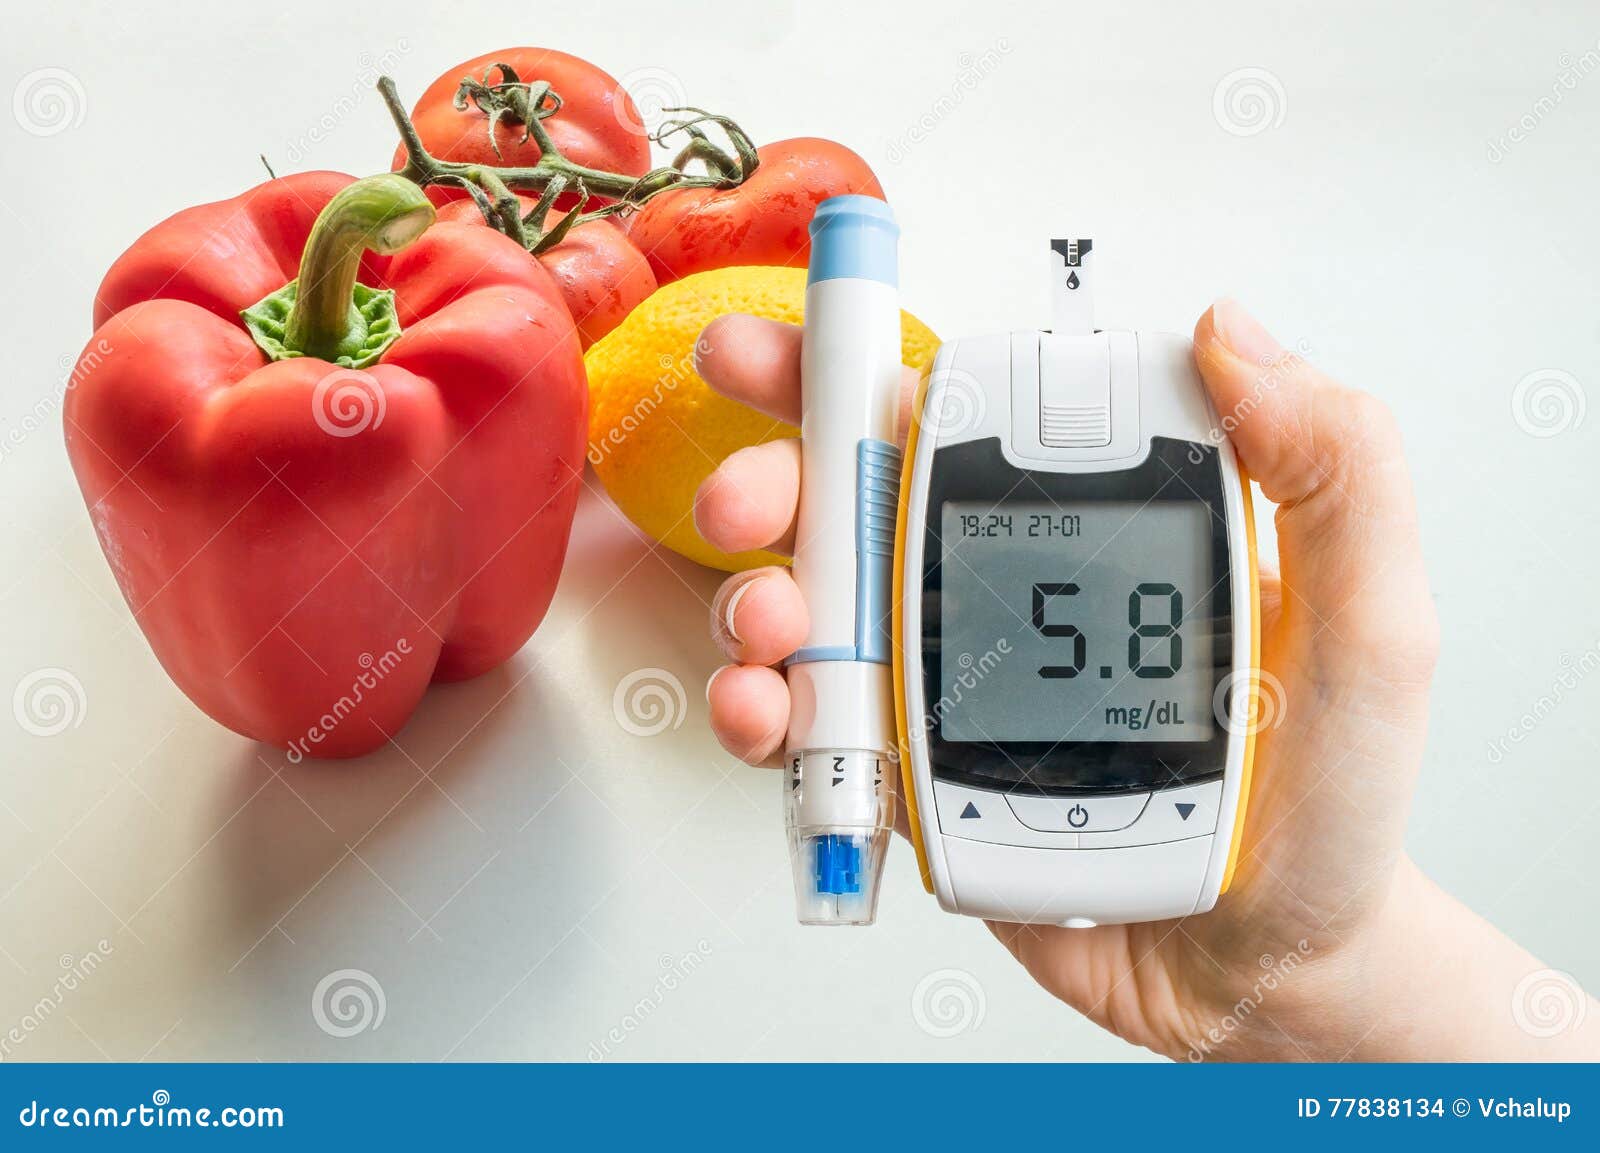 diabetic diet, diabetes and healthy eating concept. glucometer and vegetables.